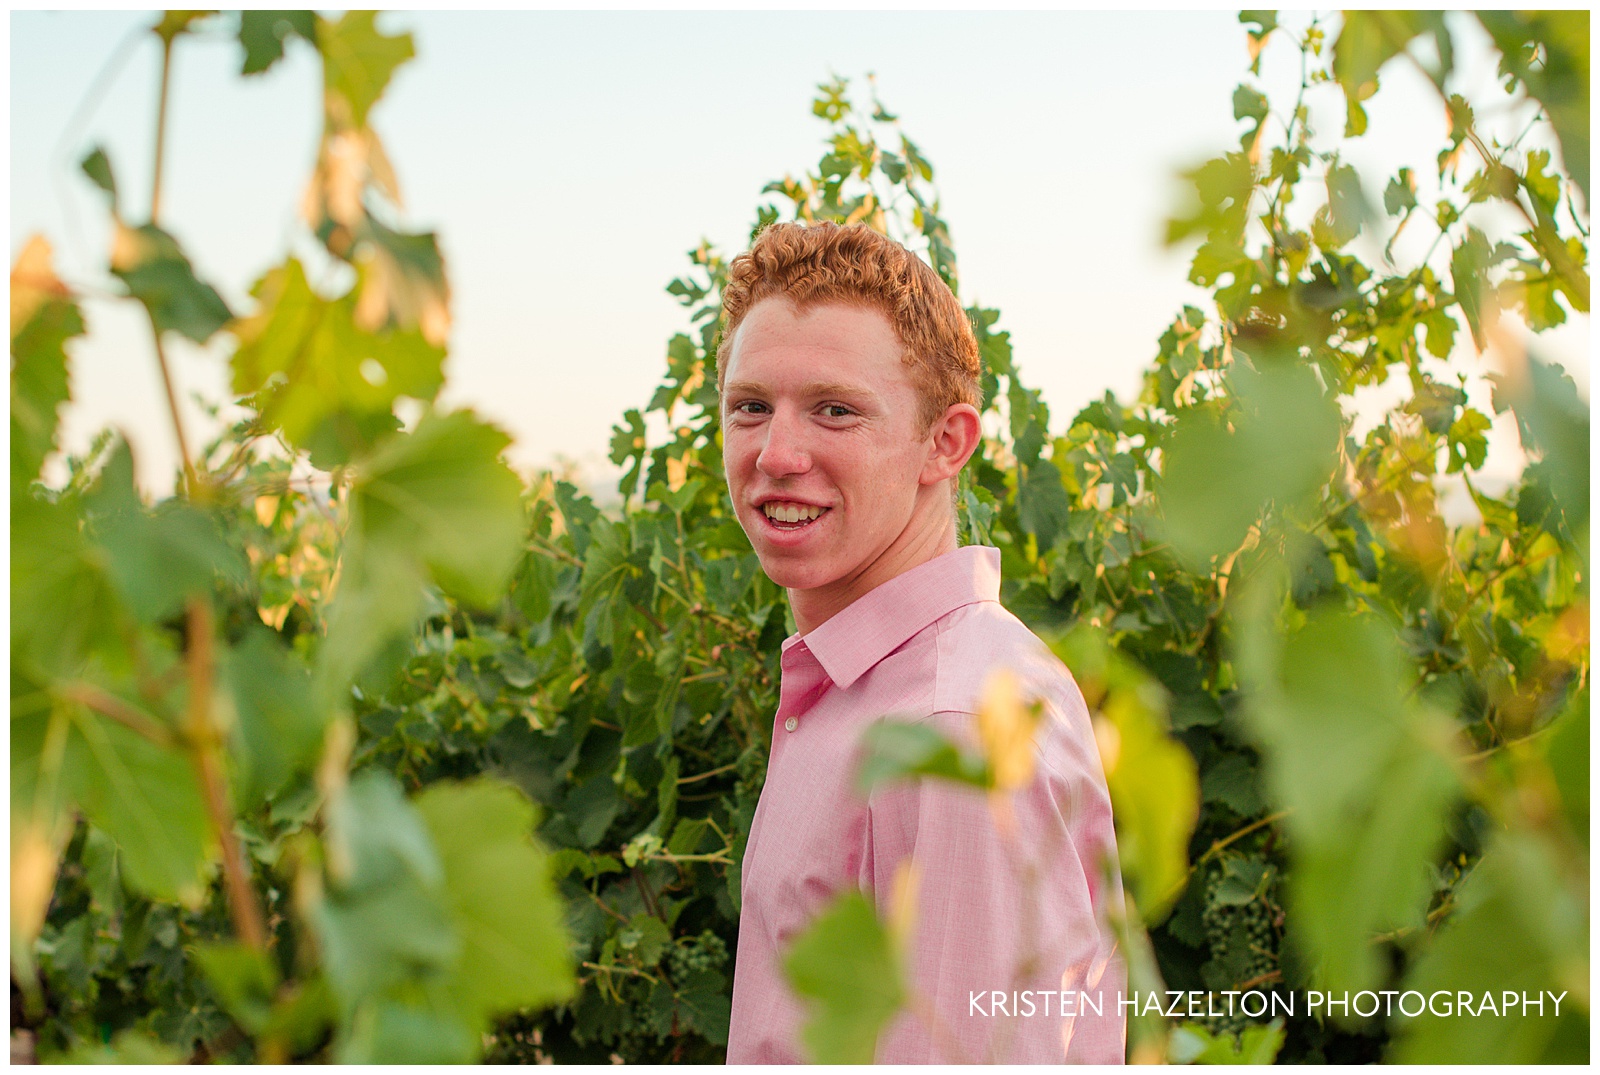 Senior portrait of a male looking at the camera, framed with grape vines